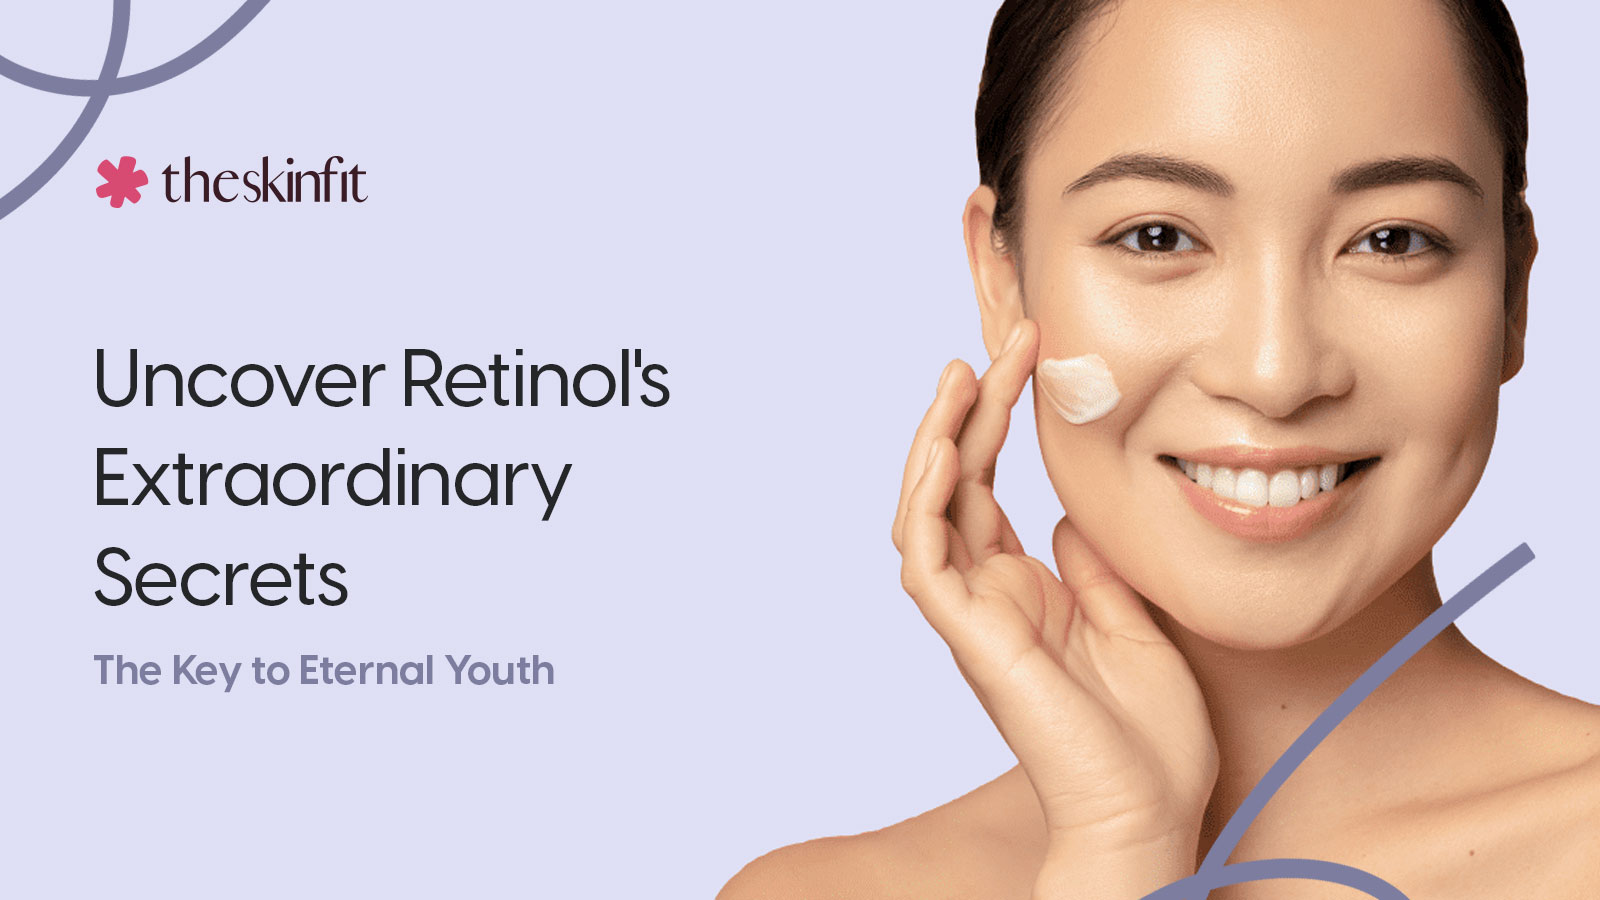 Uncover Retinol's Extraordinary Secrets: The Key to Eternal Youth